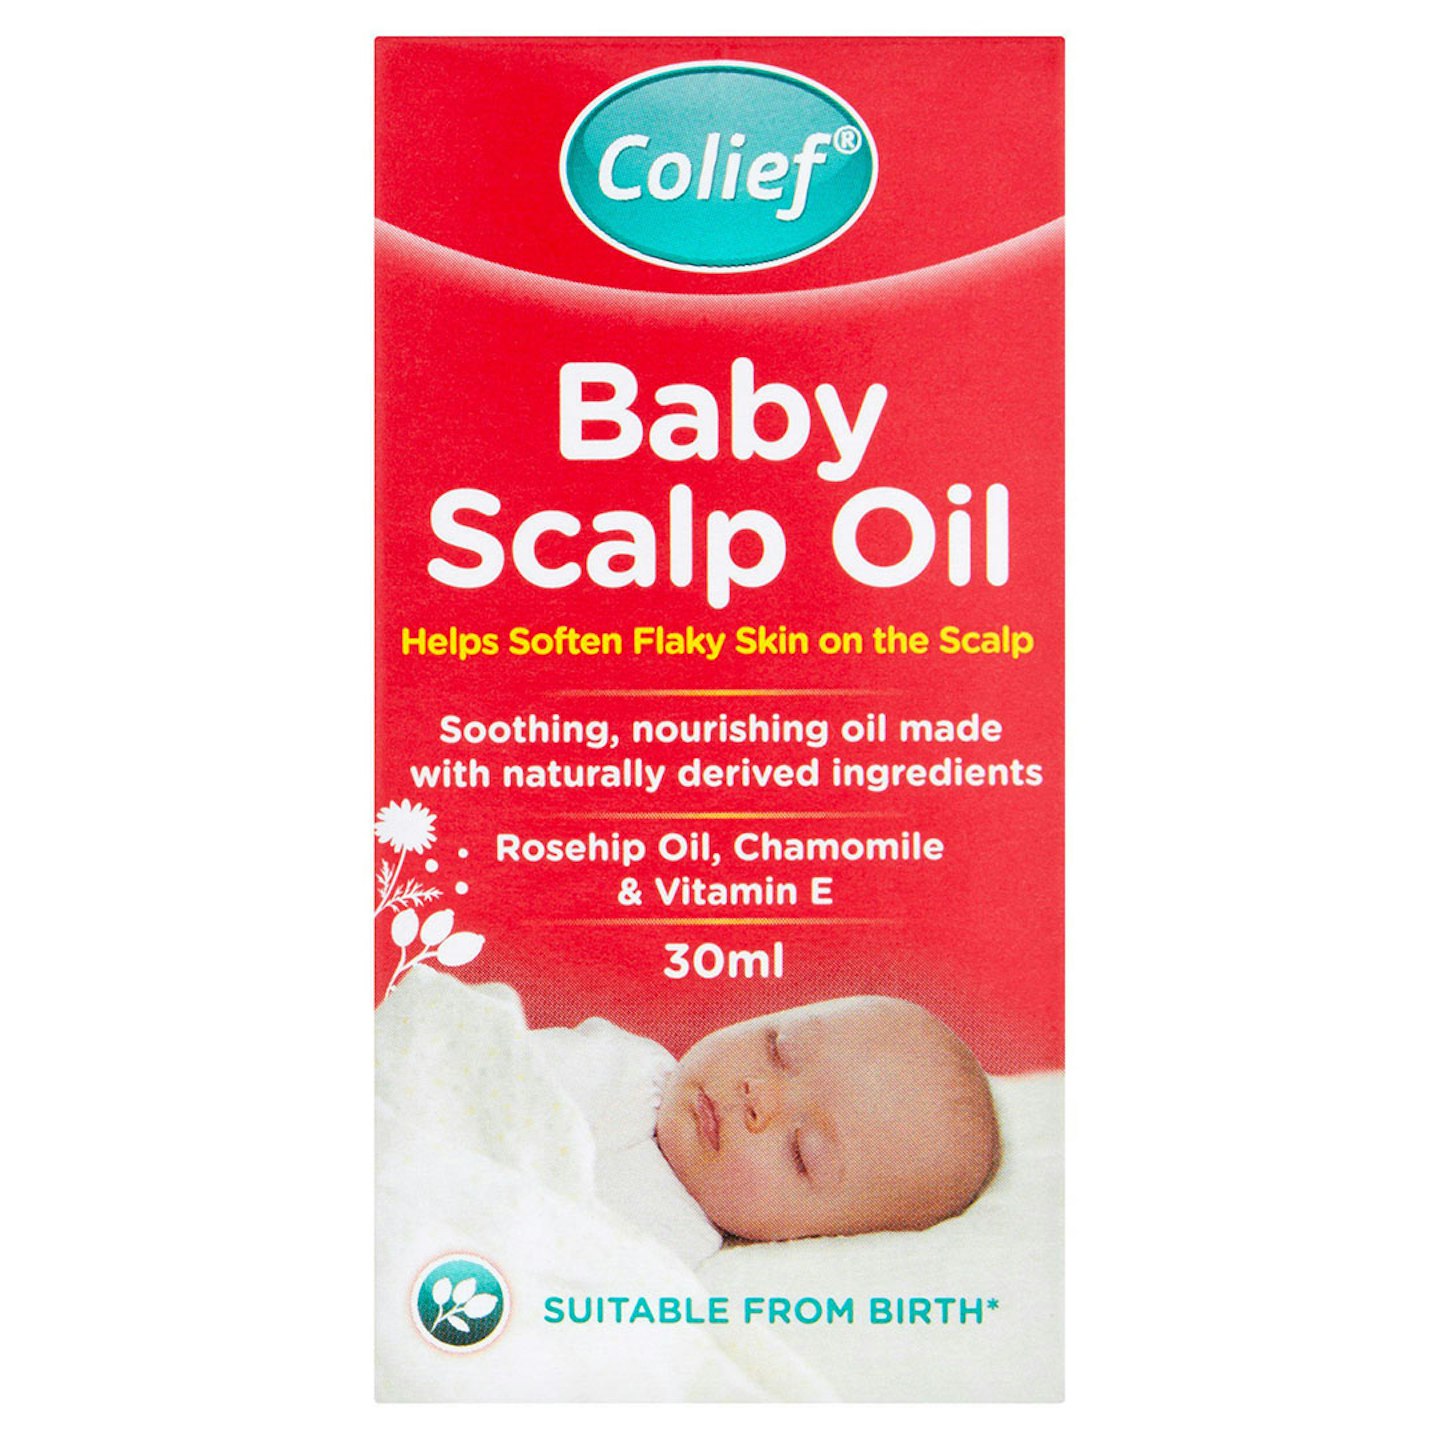 Colief baby scalp oil